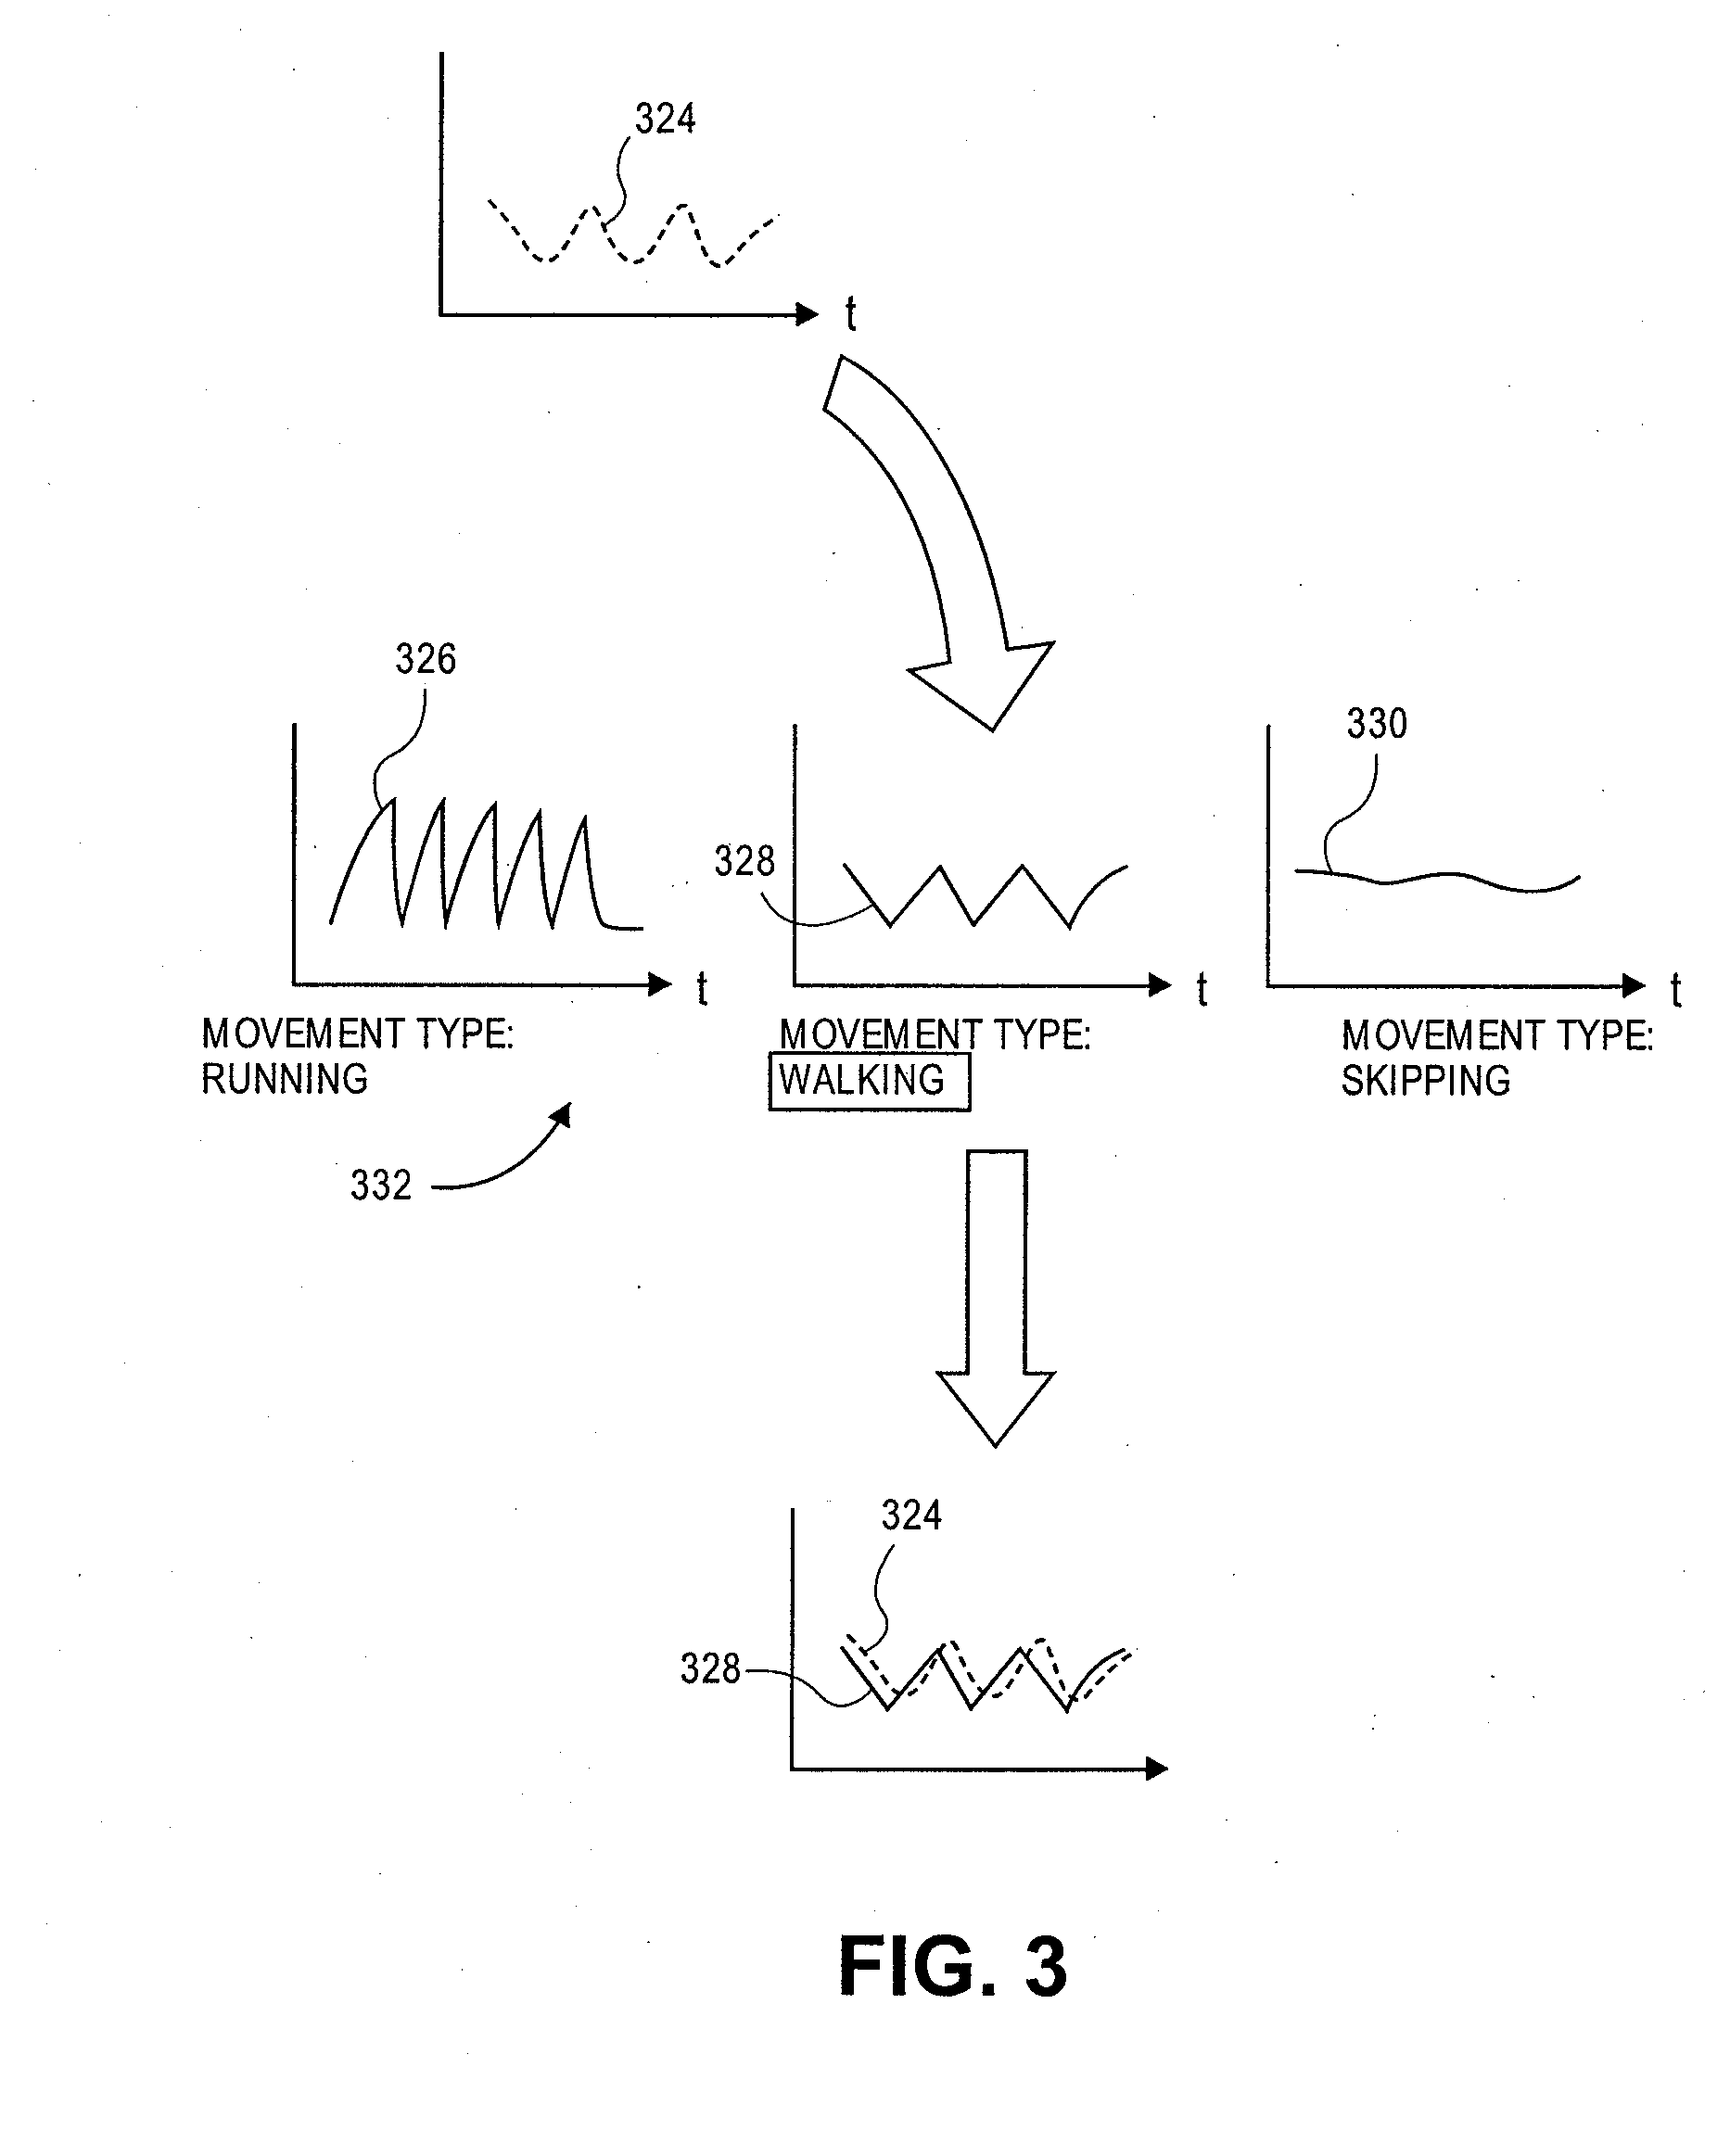 Authentication and human recognition transaction using a mobile device with an accelerometer